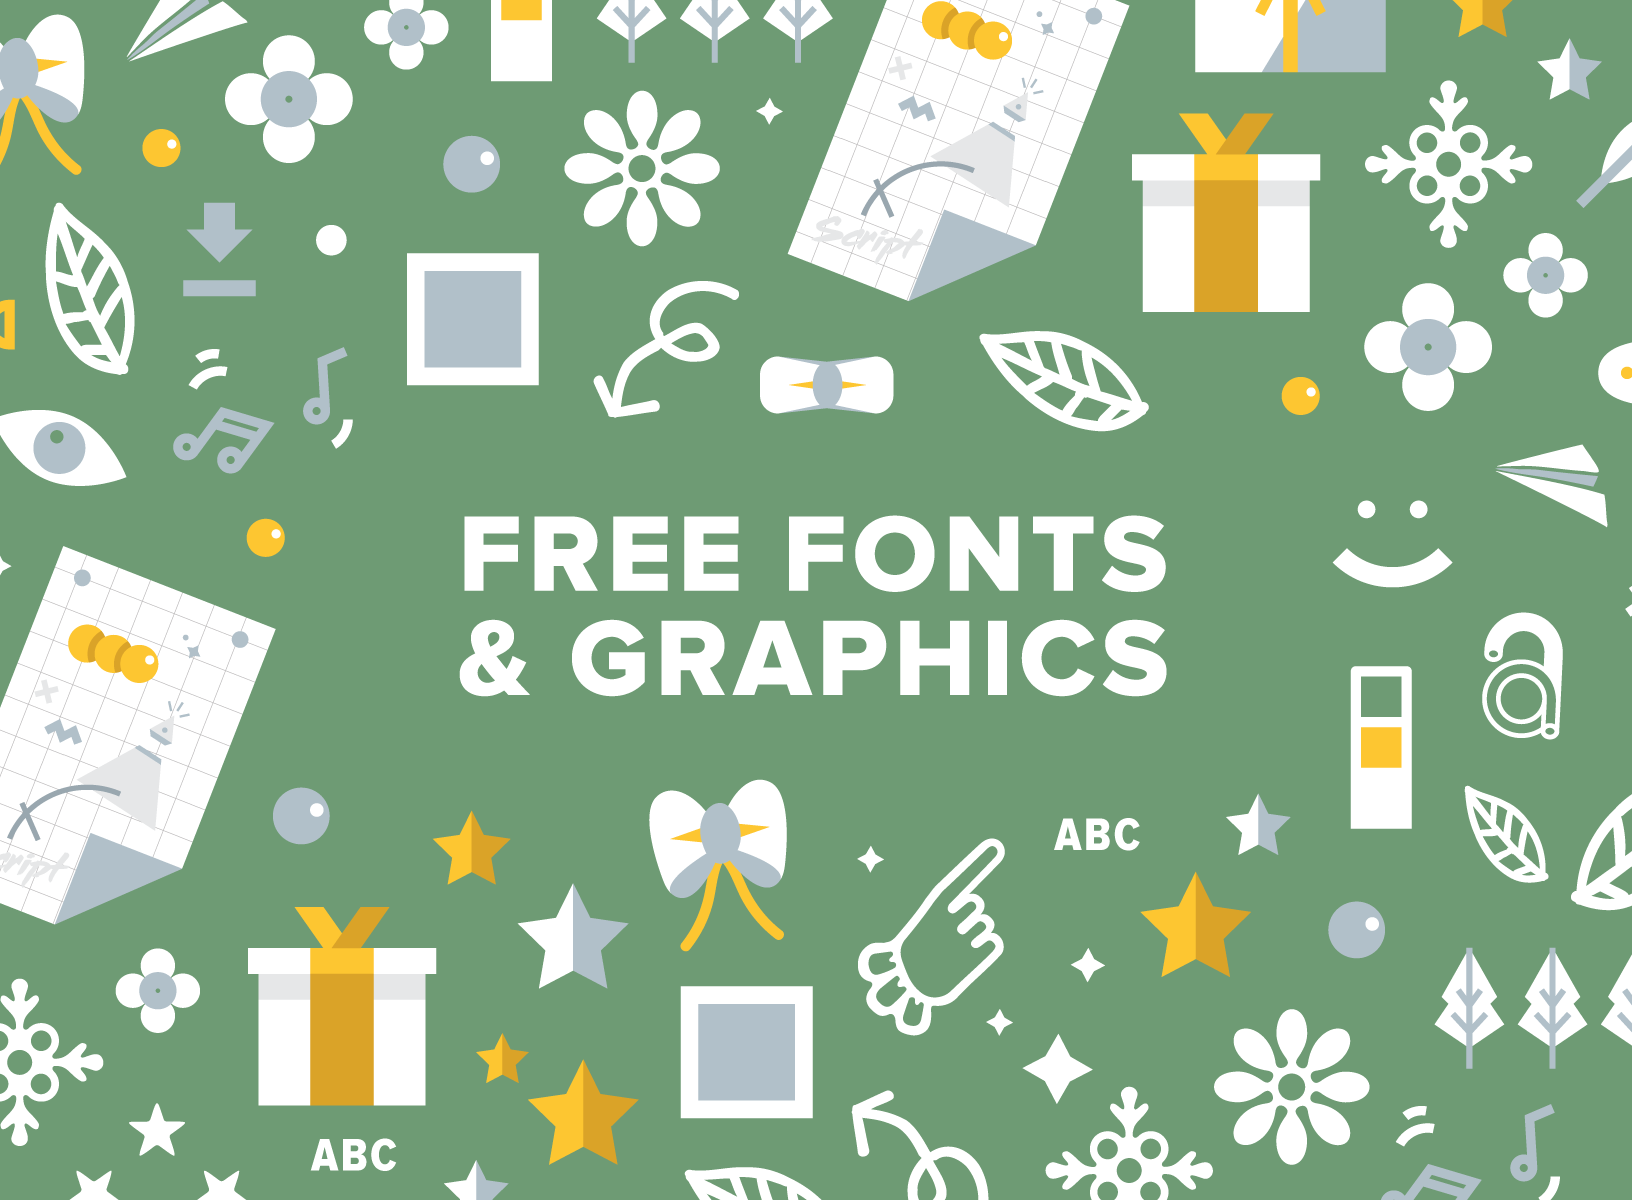 Download Free Fonts and Graphics